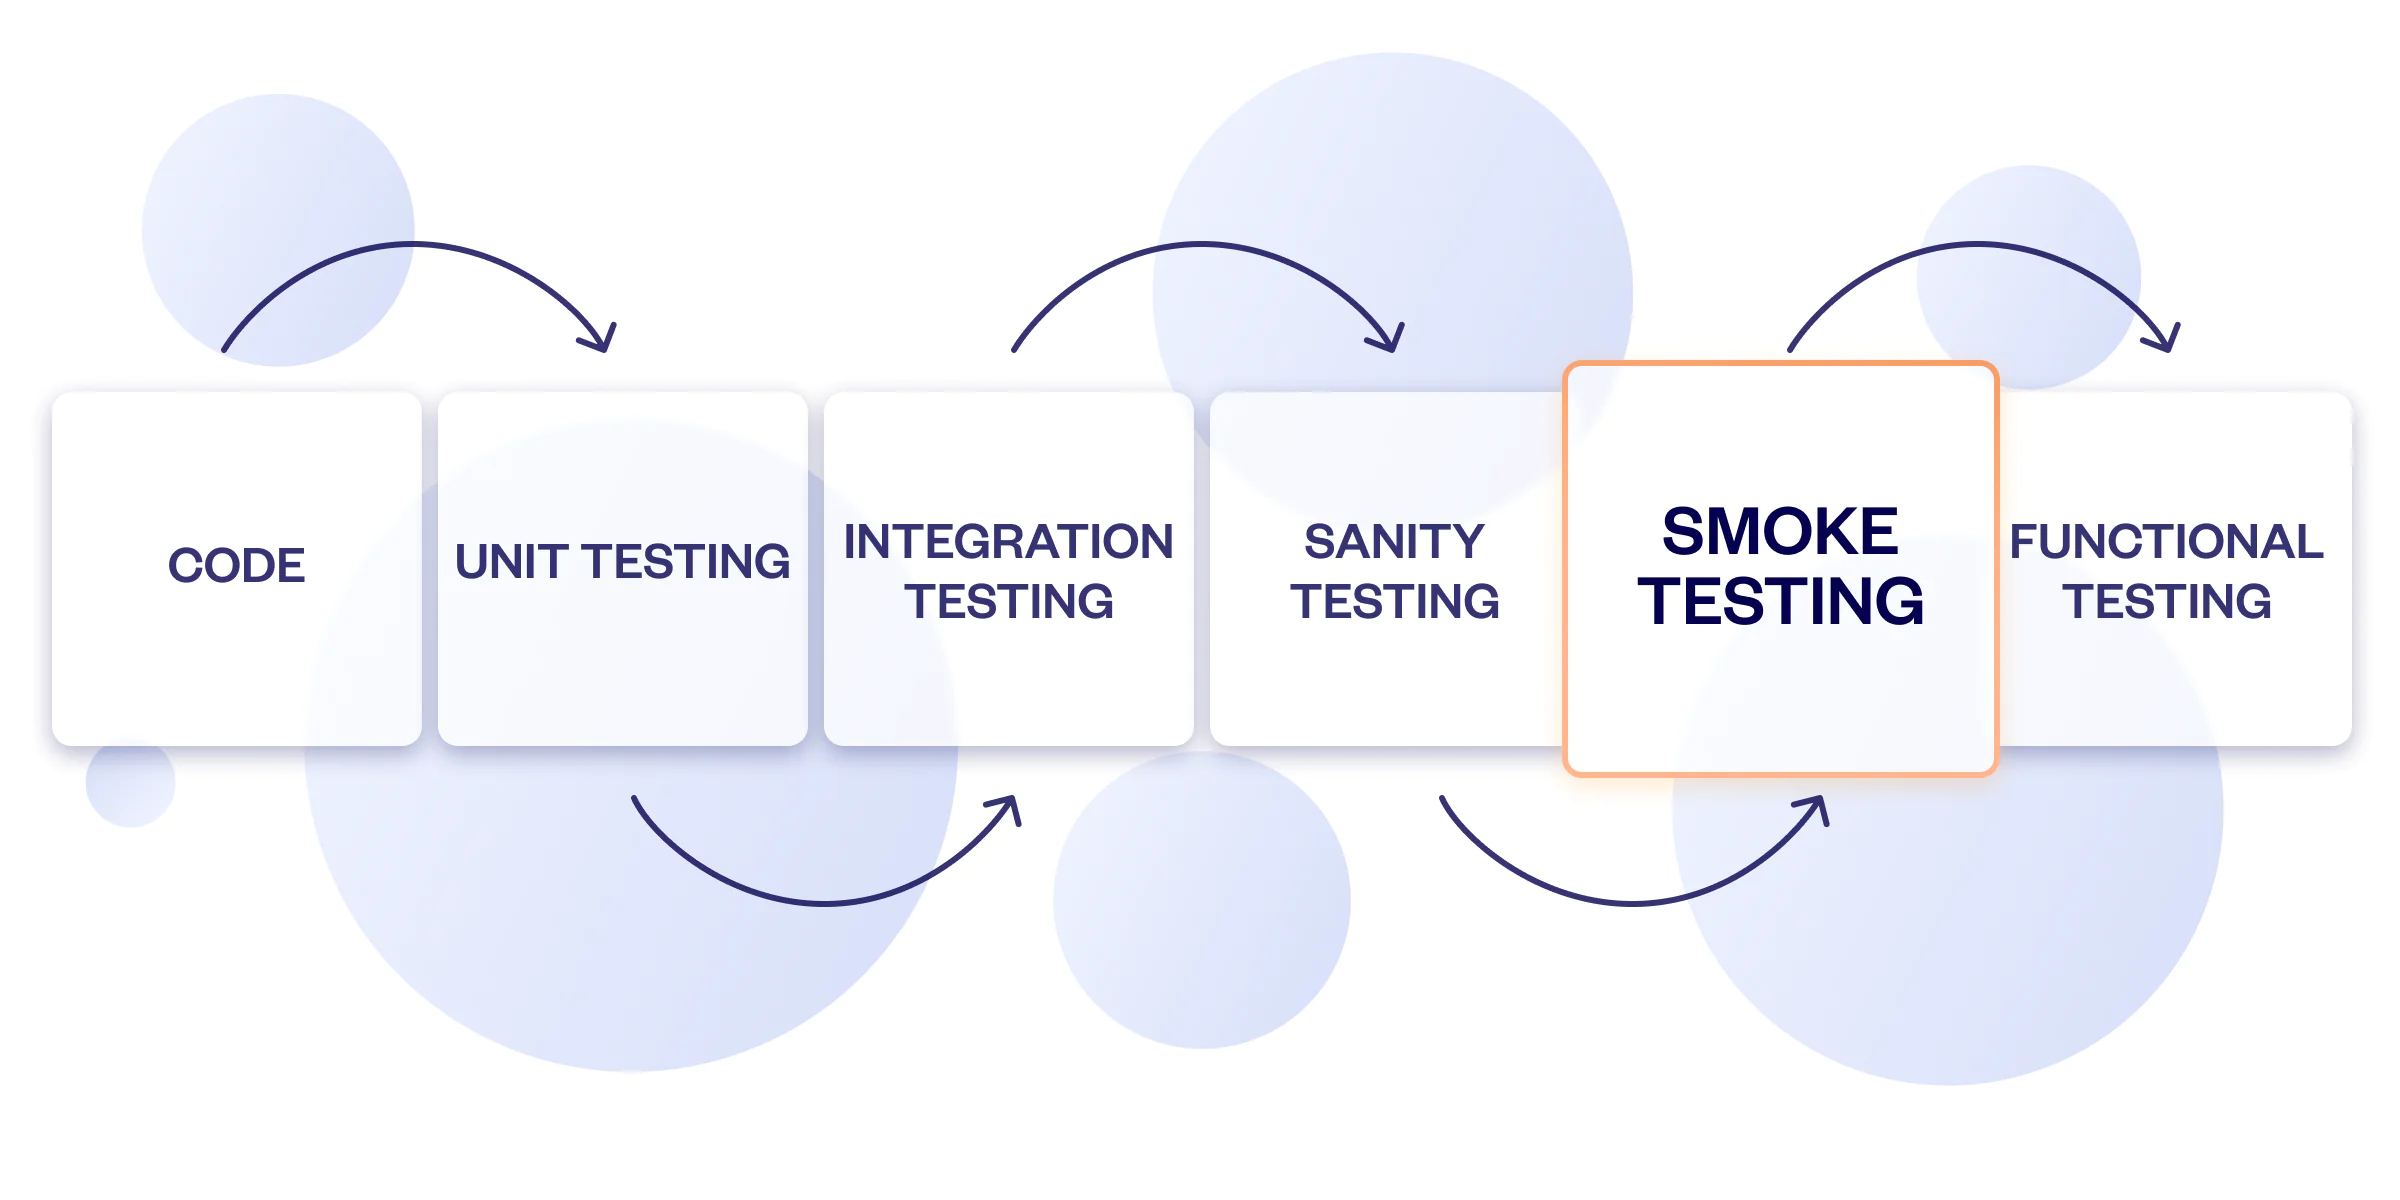 Smoke testing in the process of software QA testing